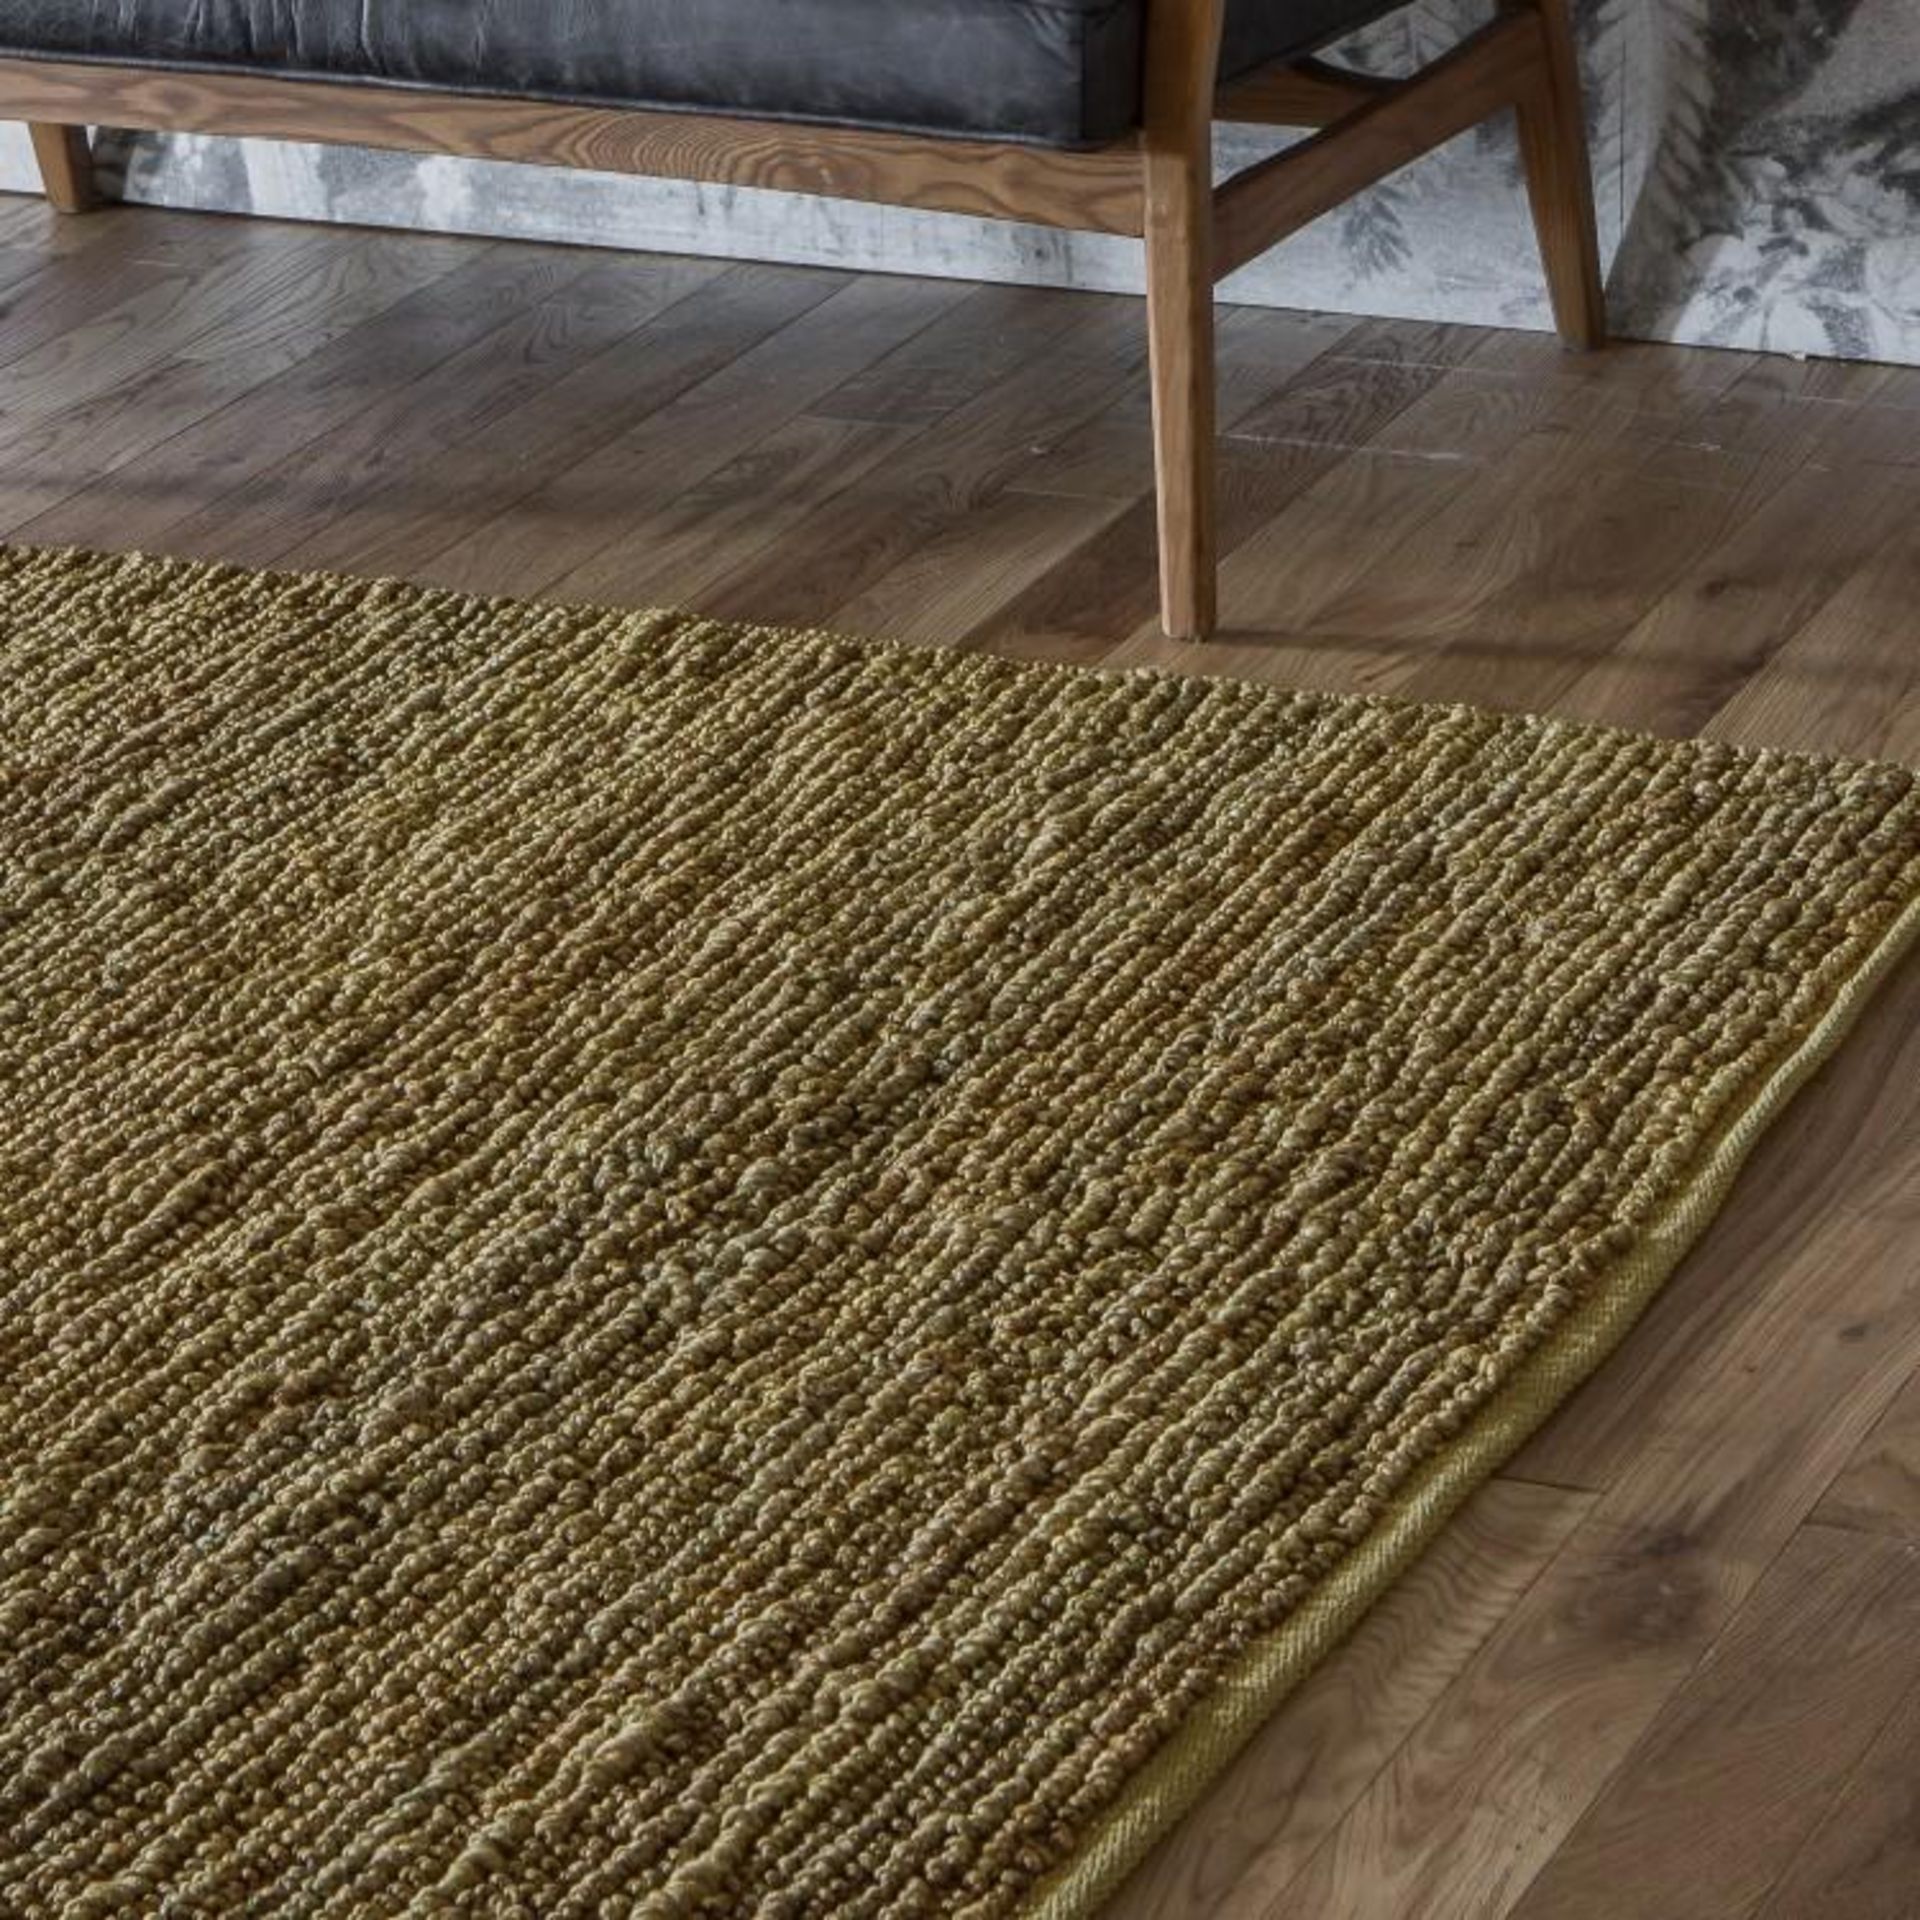 Crofter Rug Ochre Bring Style To The Home With The Crofter Rug Ochre This Piece Instantly Brings